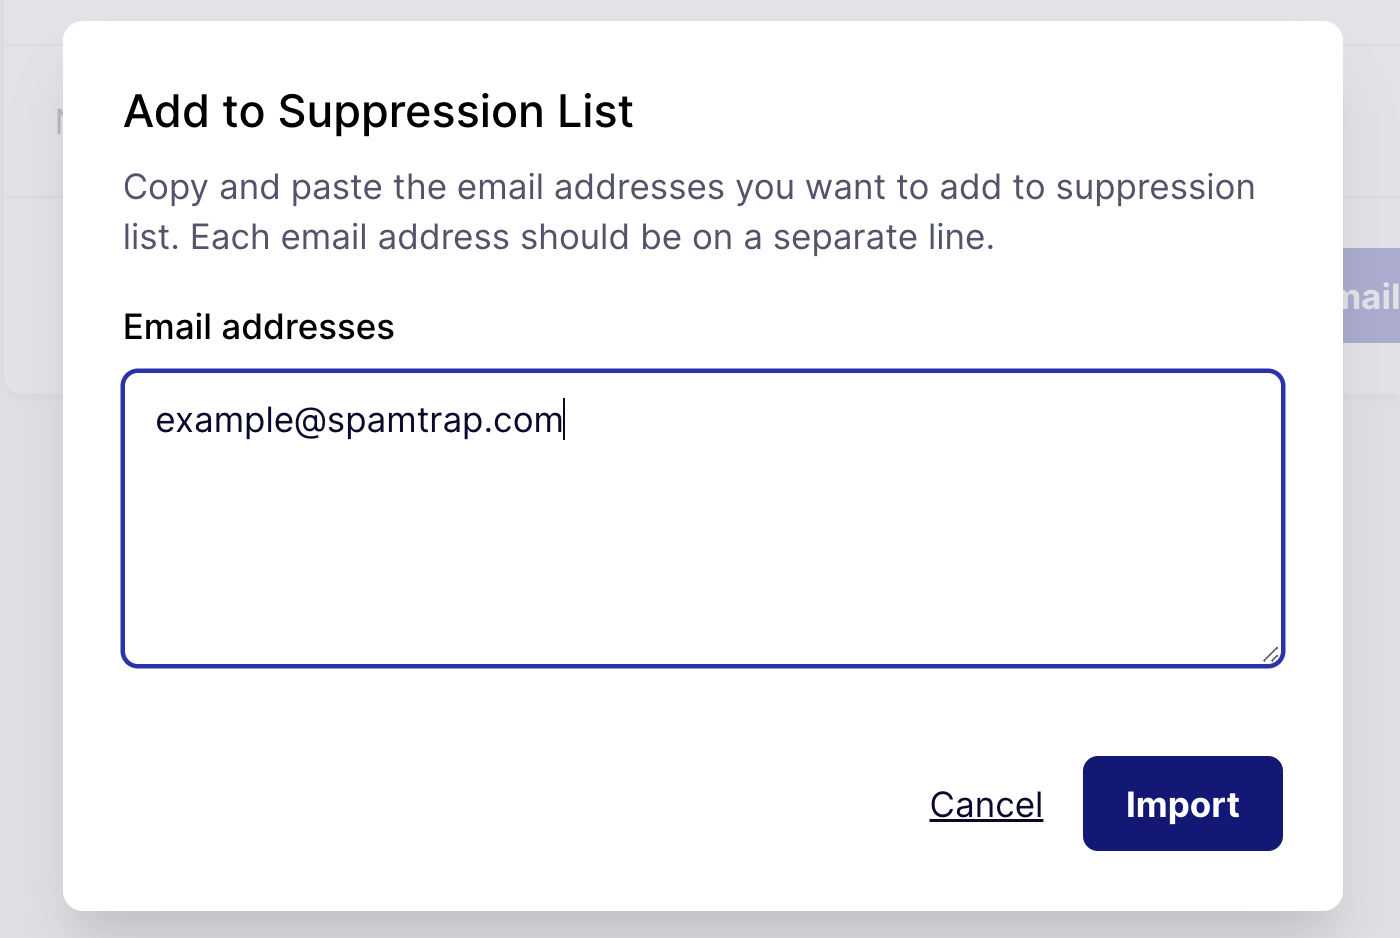 Importing email addresses to your suppression list